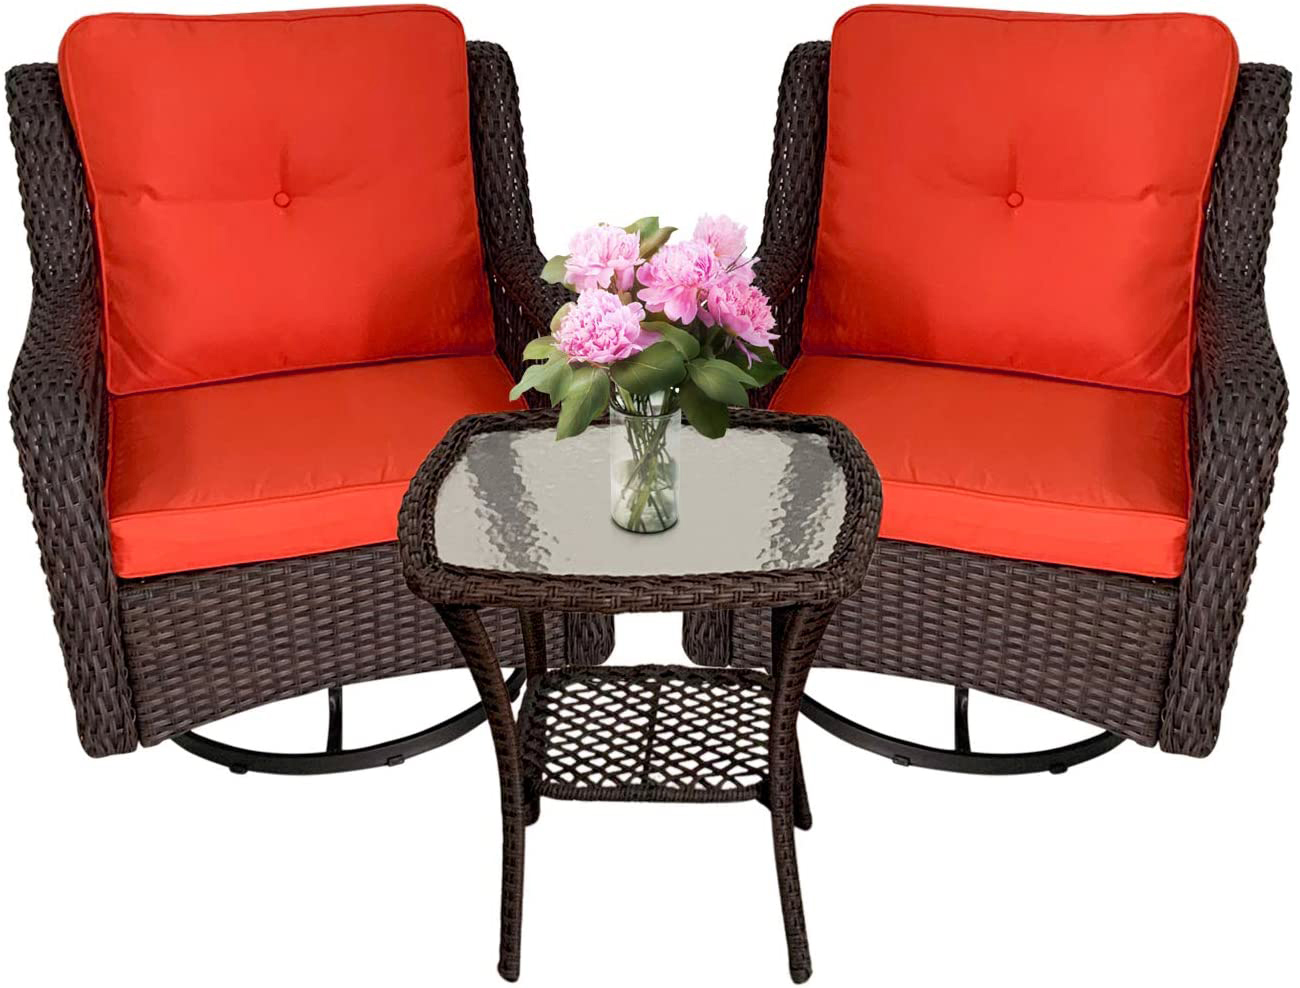 3-Piece Rattan Wicker Stainless Chat Set with Swivel Rocking Chairs Coffee Table for Indoor Outdoor Space Deck Porch Patio Conversation Bistro Set Rust - image 4 of 19